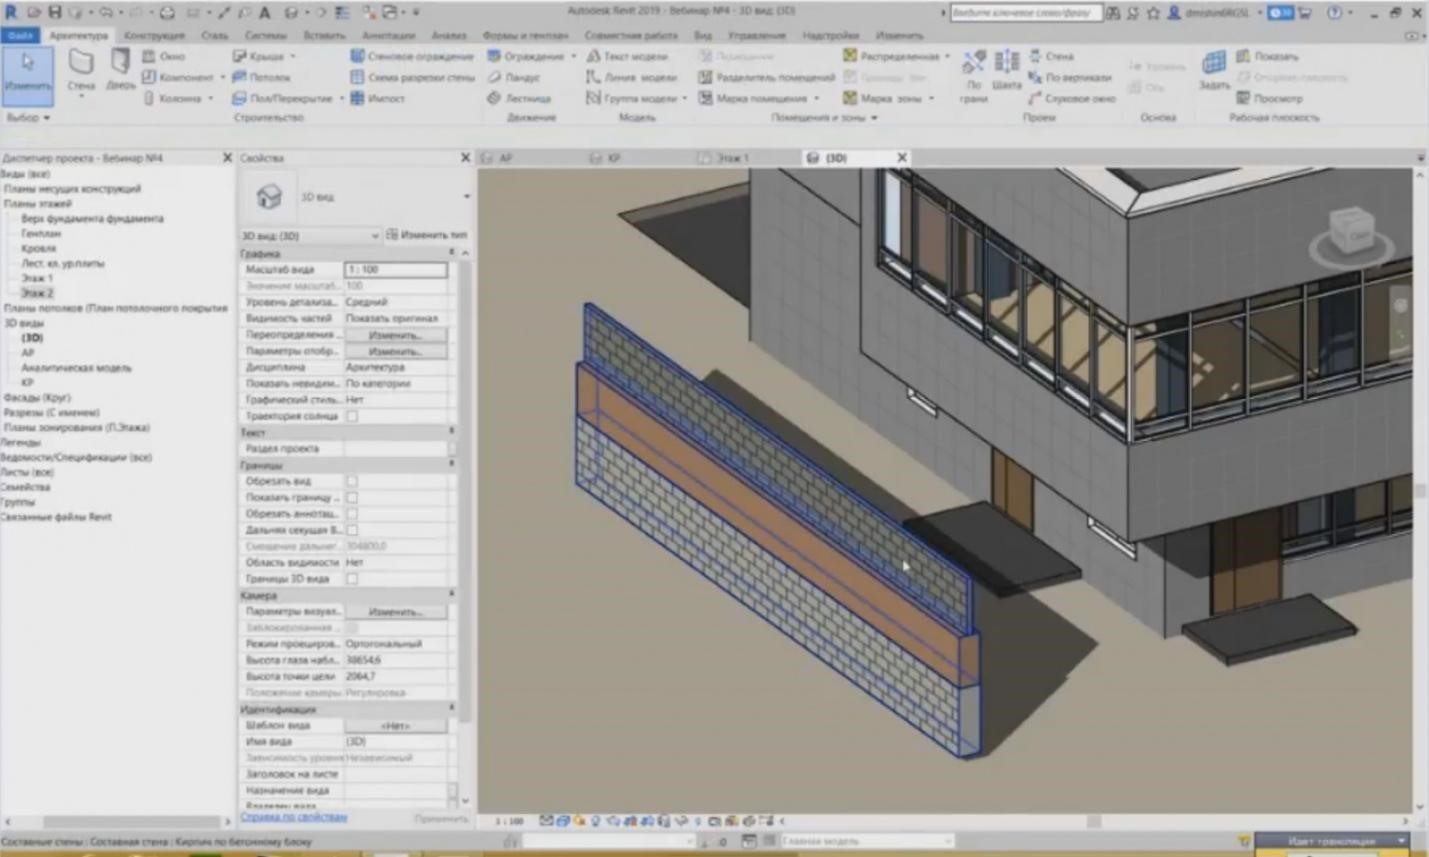 BIM DESIGN IN REVIT. CREATING ARCHITECTURAL AND STRUCTURAL ELEMENTS. PAGE 2-37